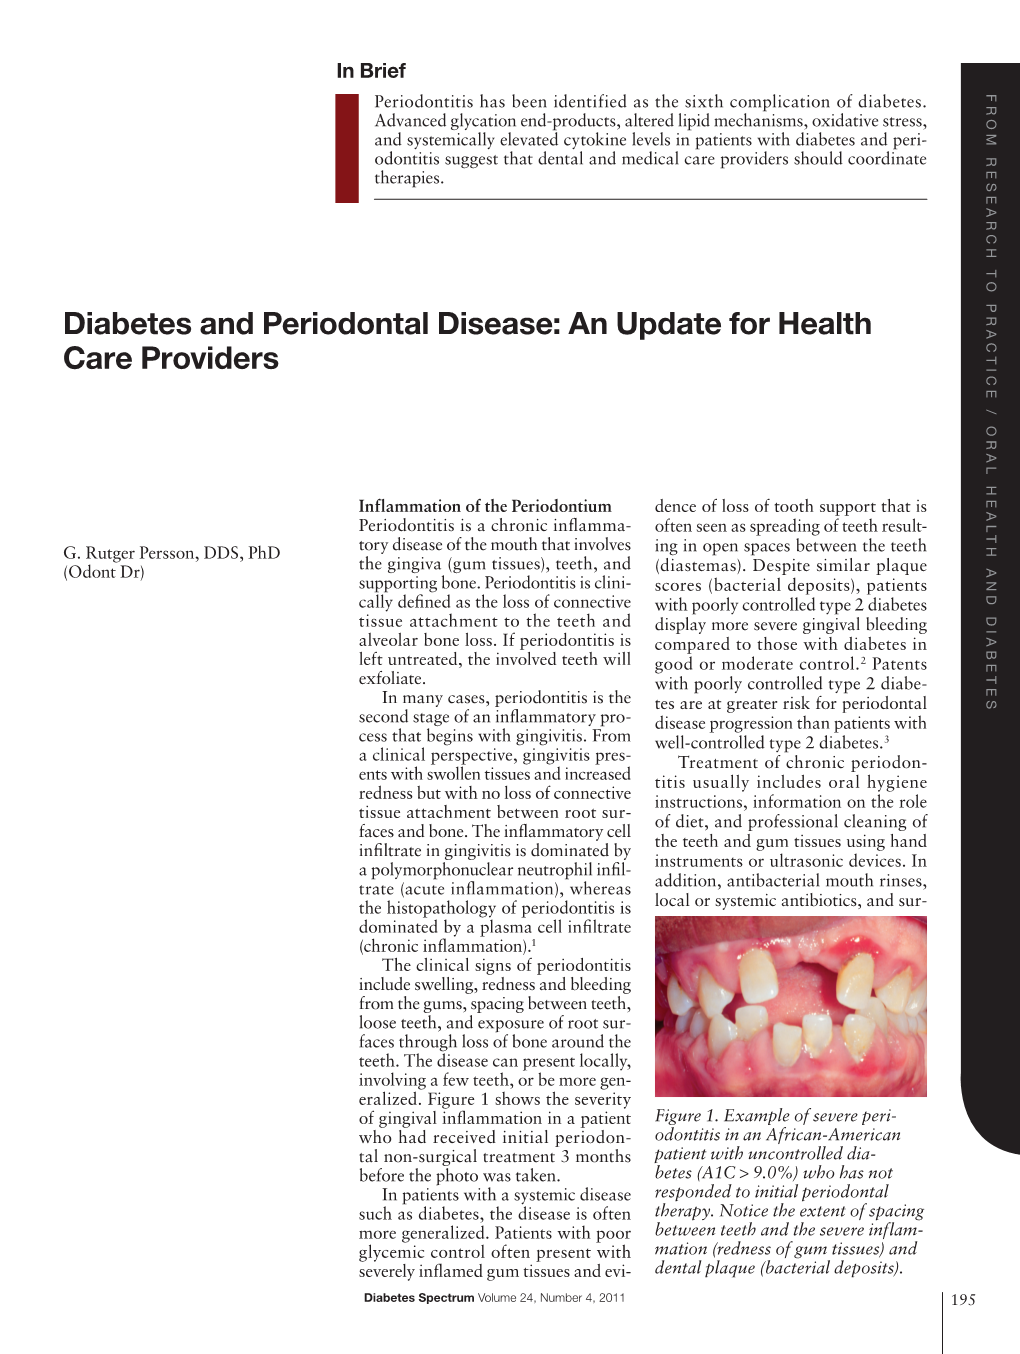 Diabetes and Periodontal Disease: an Update for Health Care Providers